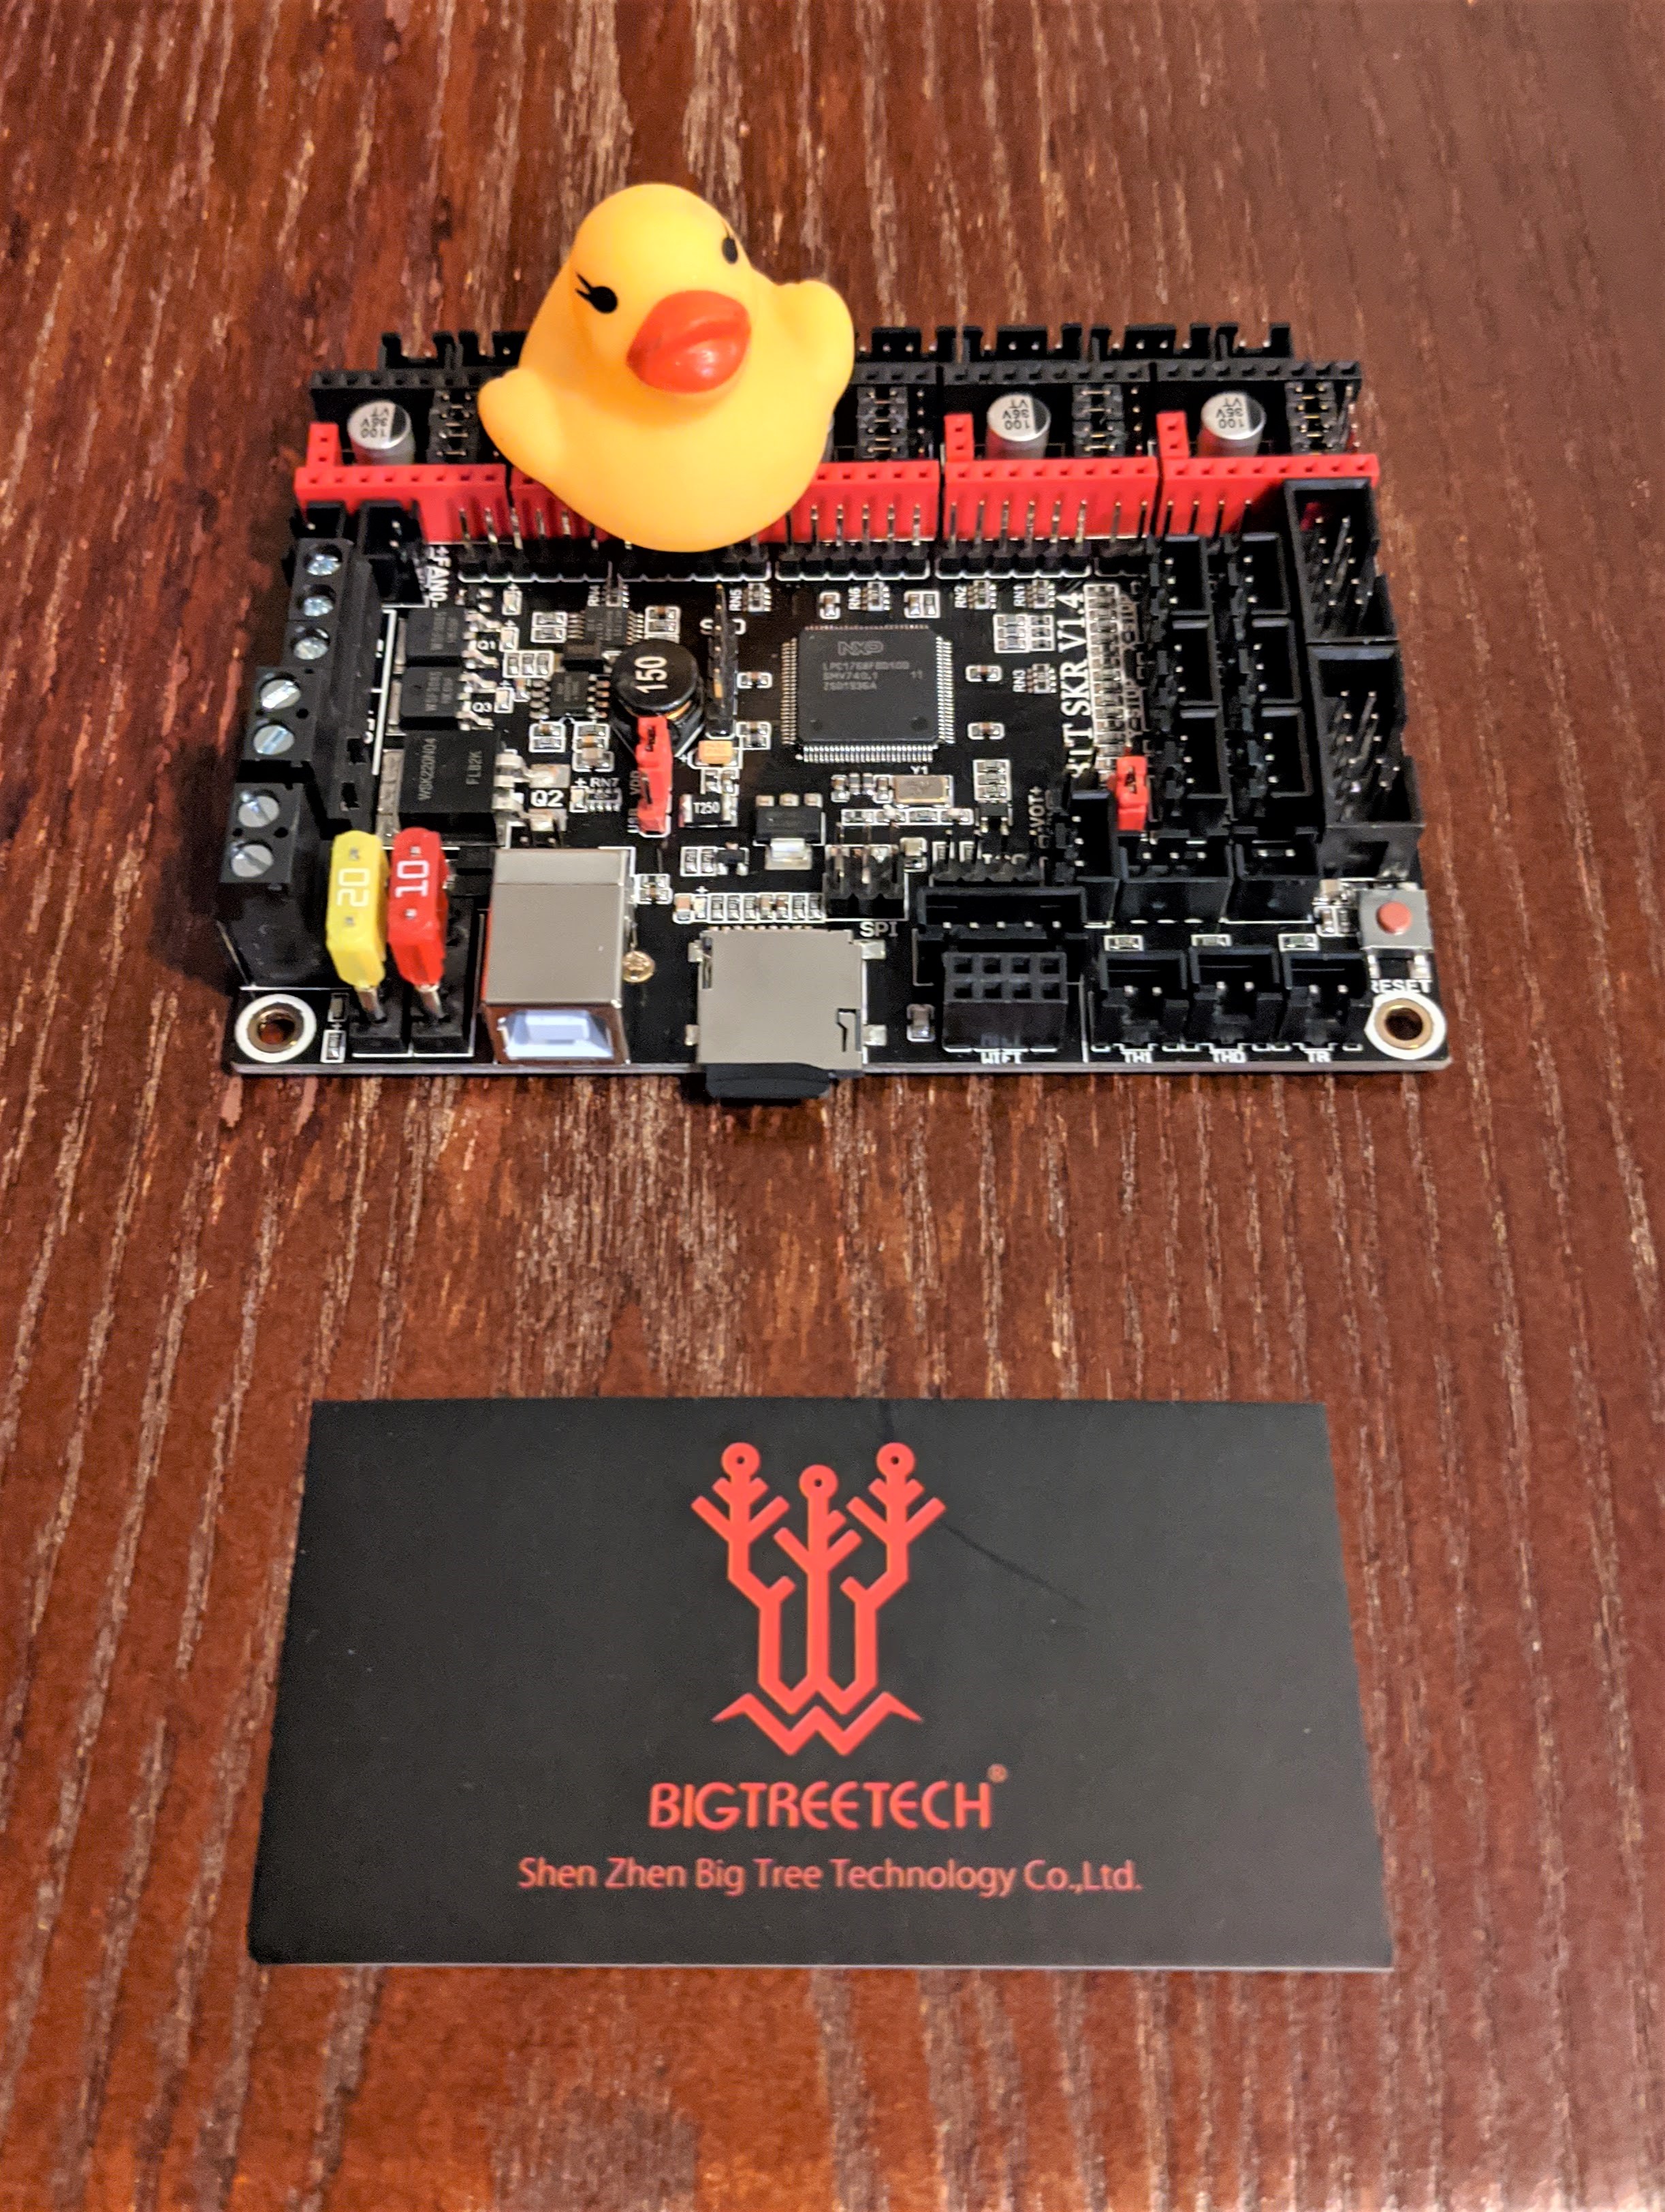 The SKR 1.4 board from BigTreeTech has a 32-bit MCU and fully configured internal routing for UART motor driver signals